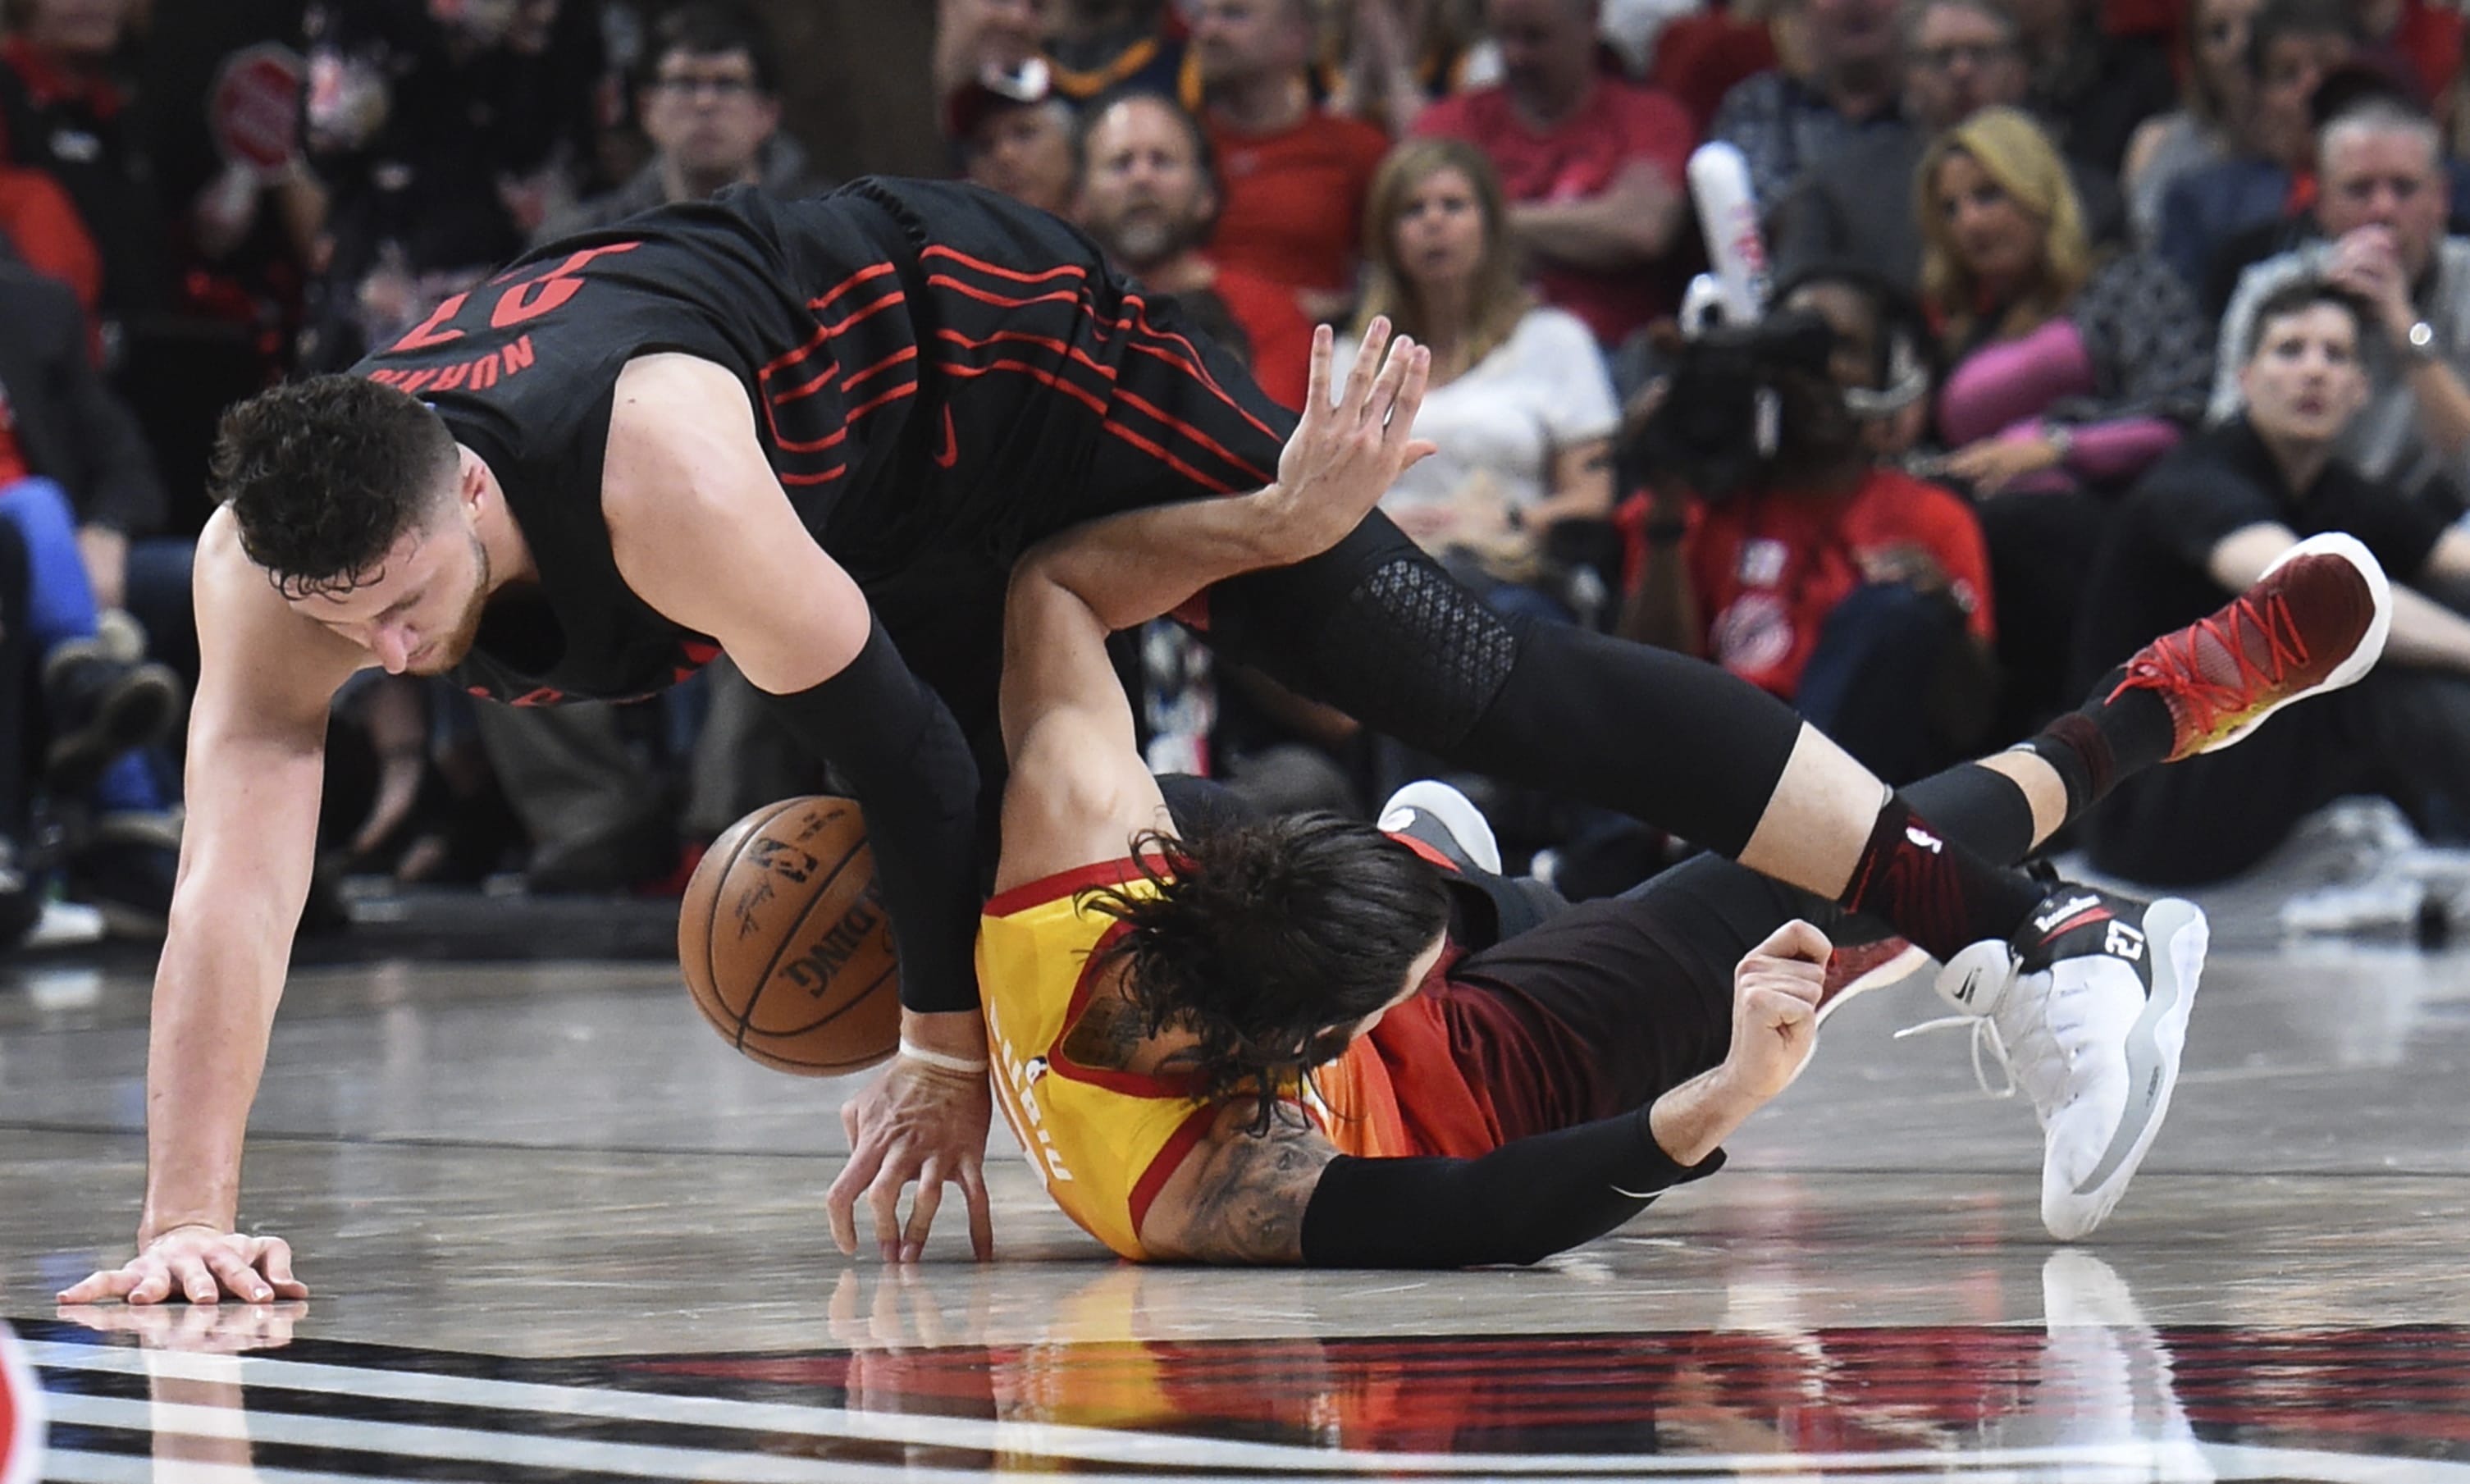 Portland Trail Blazers center Jusuf Nurkic, top, and Utah Jazz guard Ricky Rubio scramble for a ball during the second half of an NBA basketball game in Portland, Ore., Wednesday, April 11, 2018. The Blazers won 102-93.